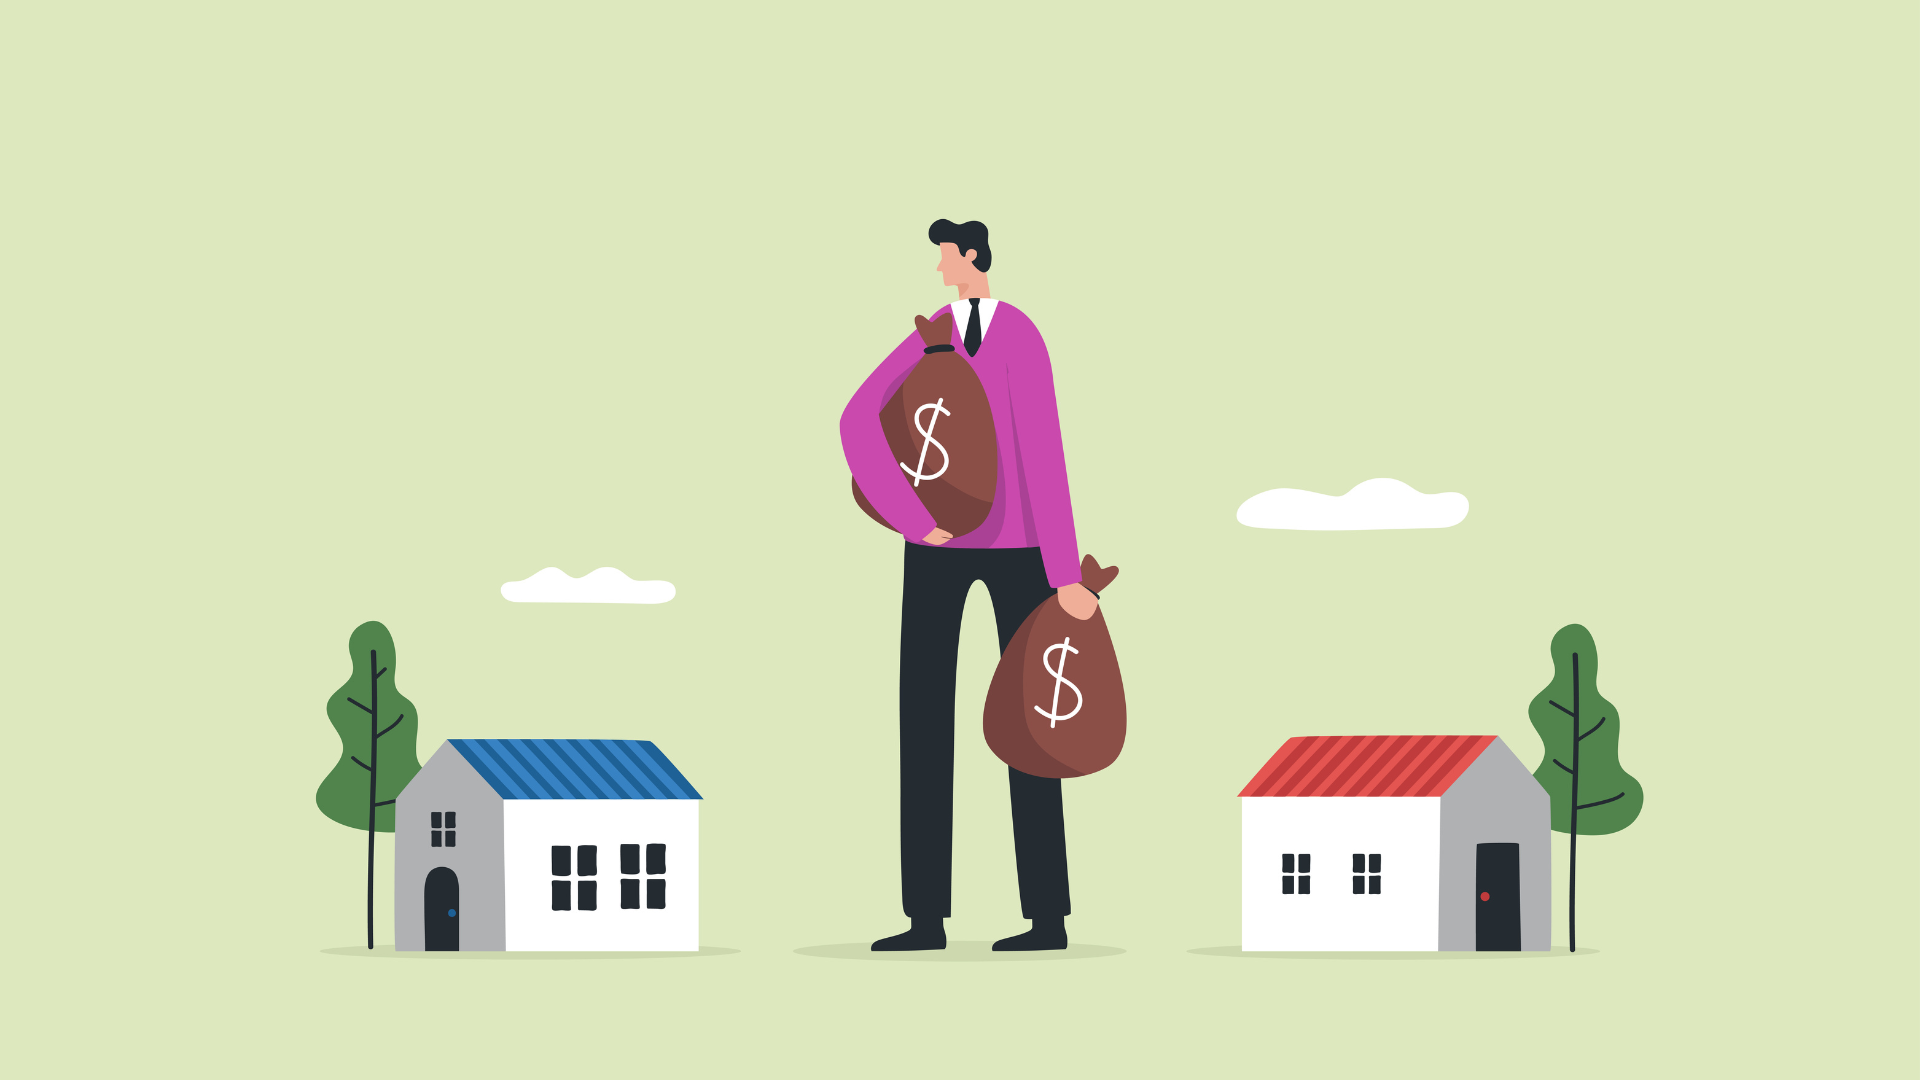 Man weighs the options between money and housing